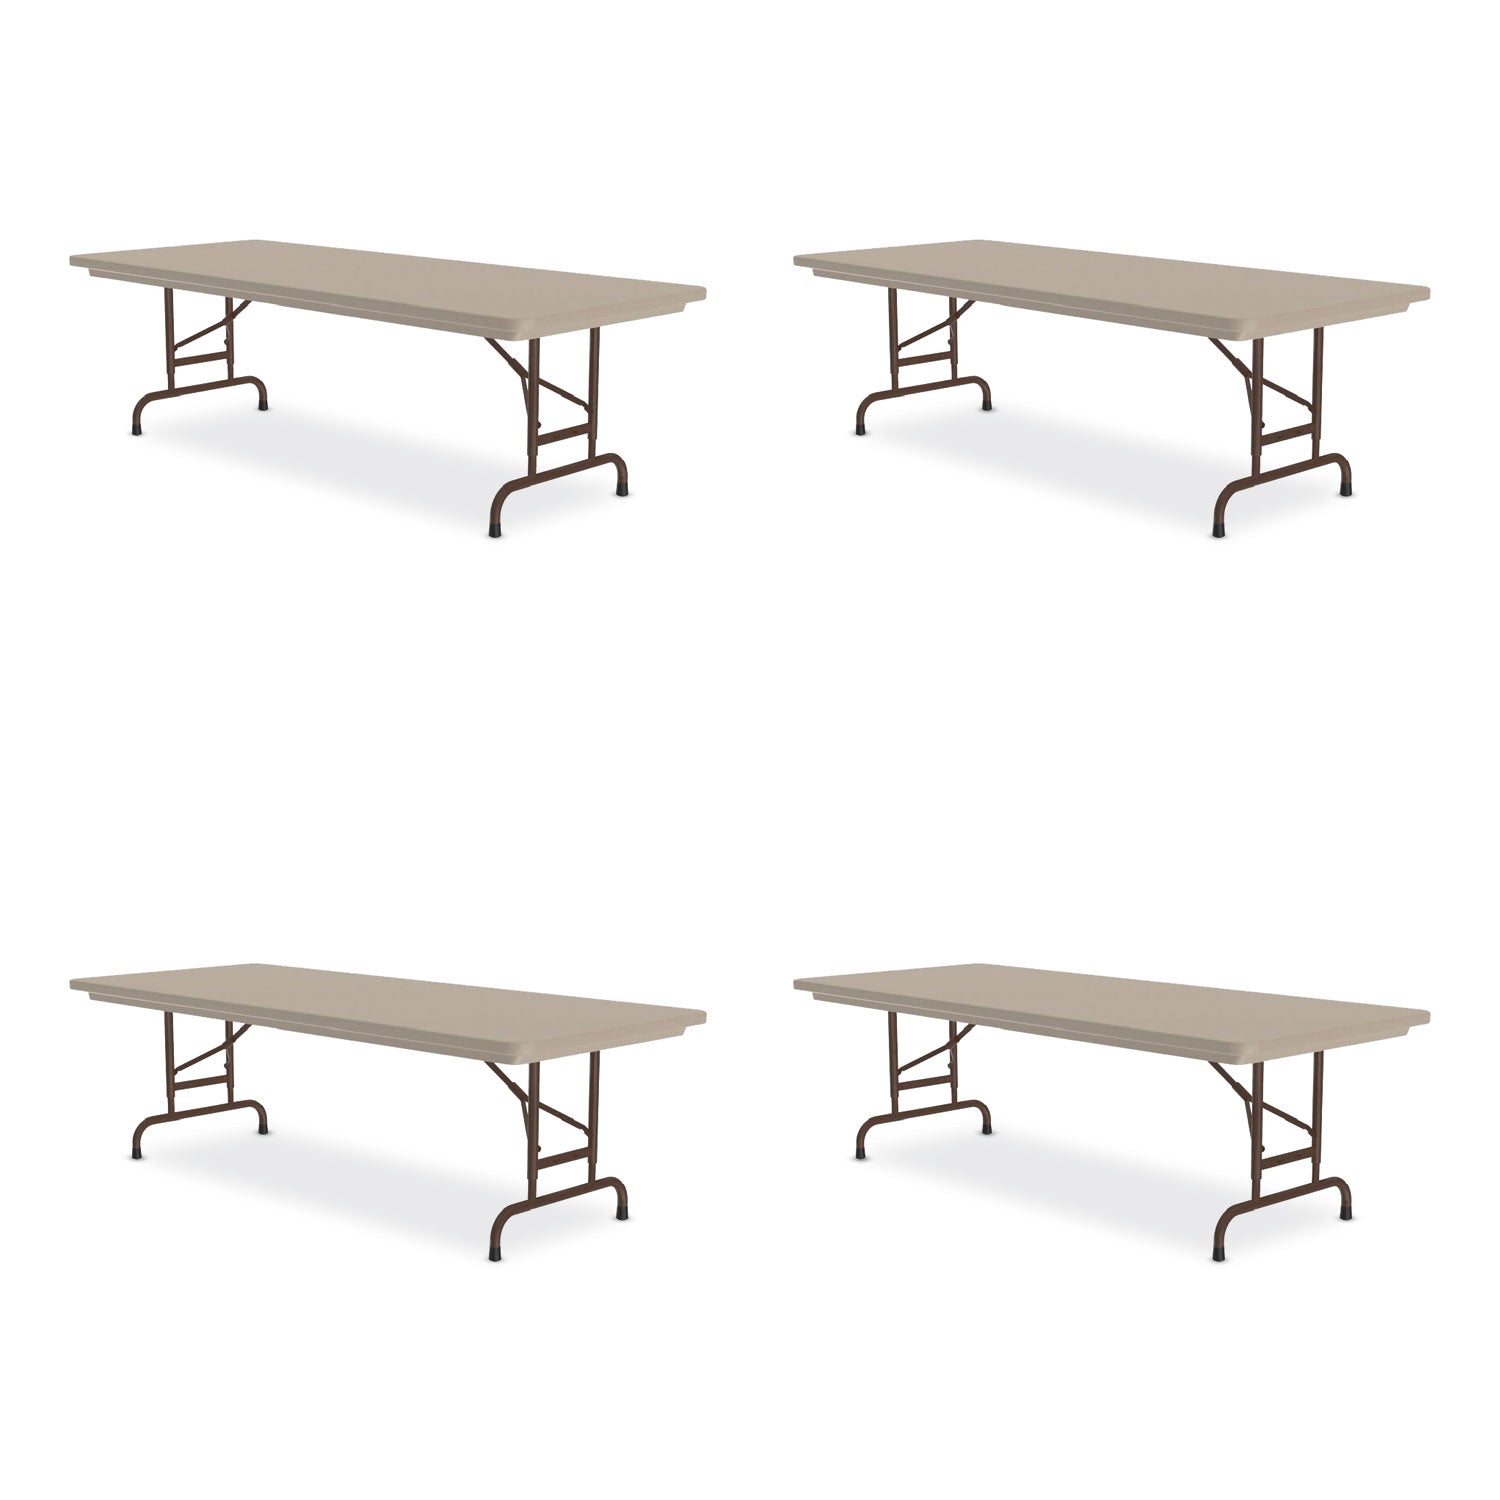 adjustable-folding-tables-rectangular-96-x-30-x-22-to-32-mocha-top-brown-legs-4-pallet-ships-in-4-6-business-days_crlra3096244p - 1